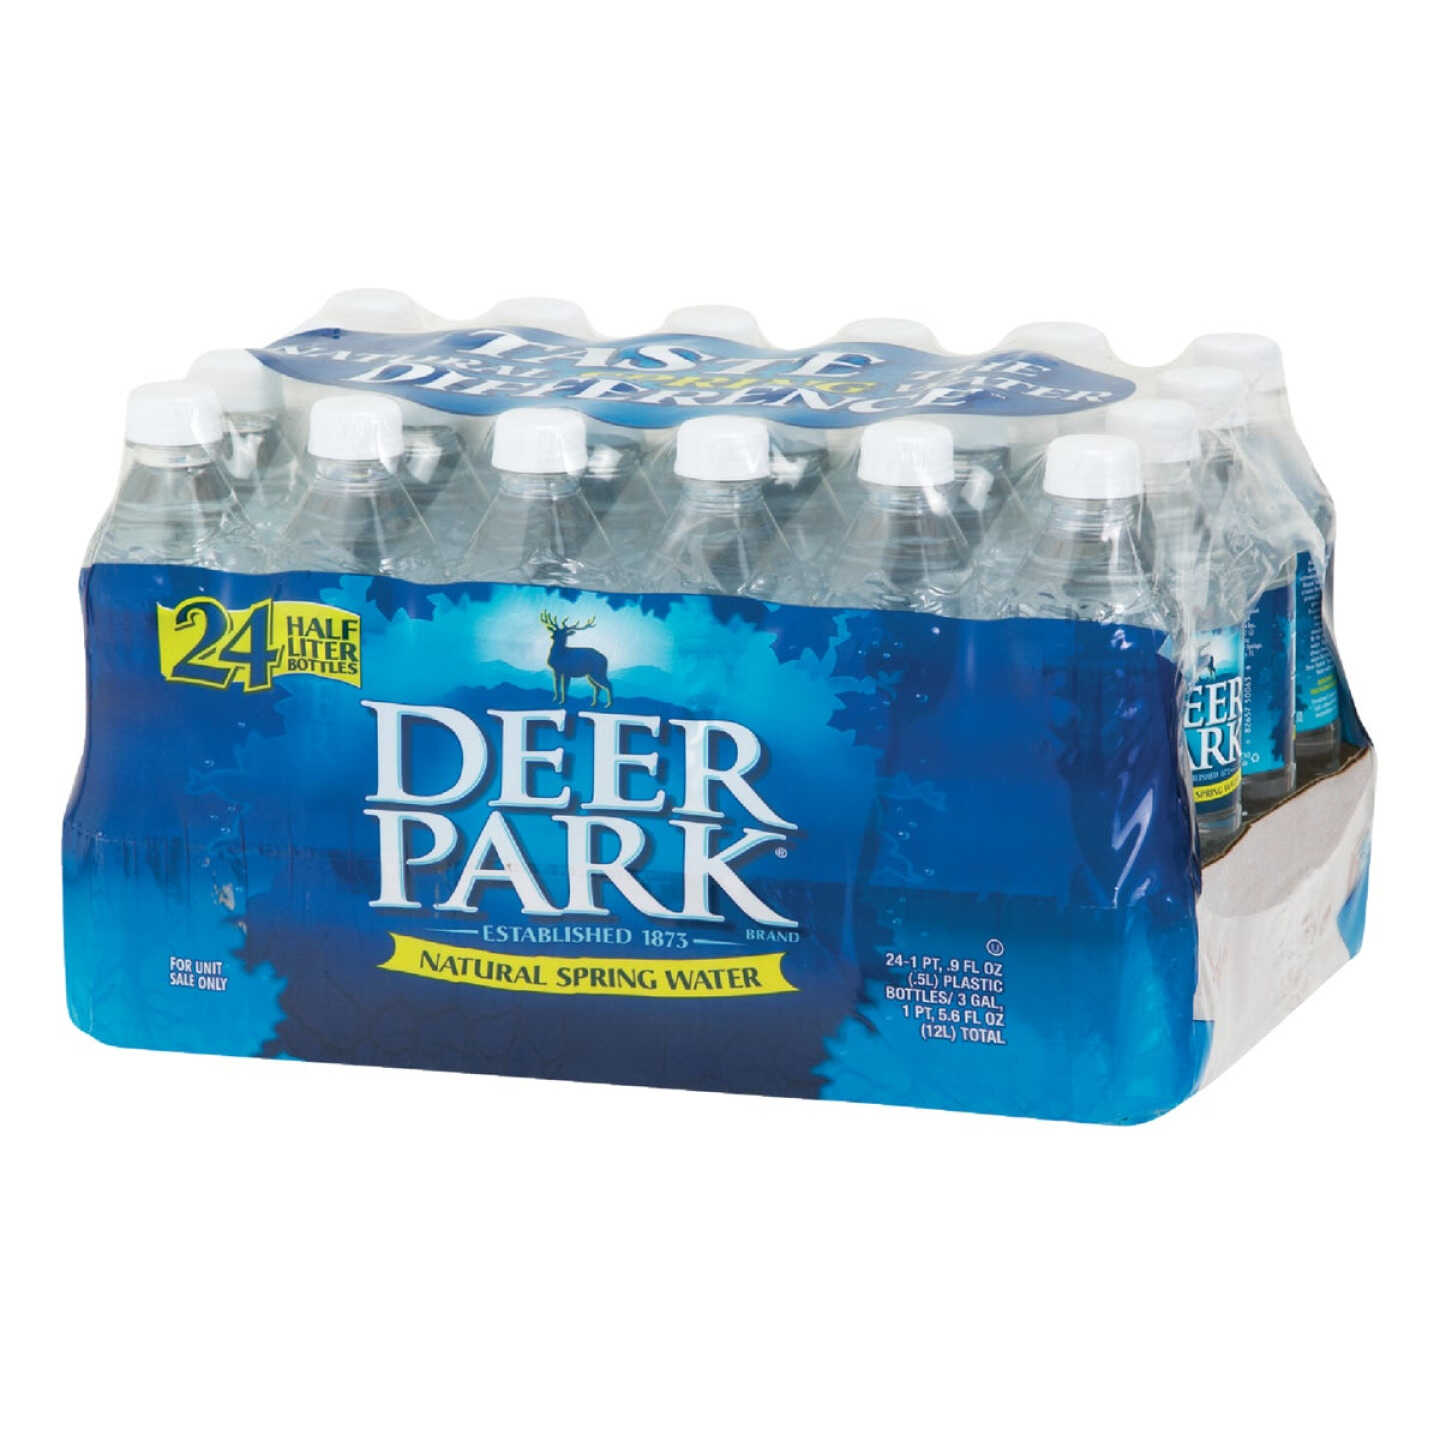 14-facts-about-deer-park-spring-water